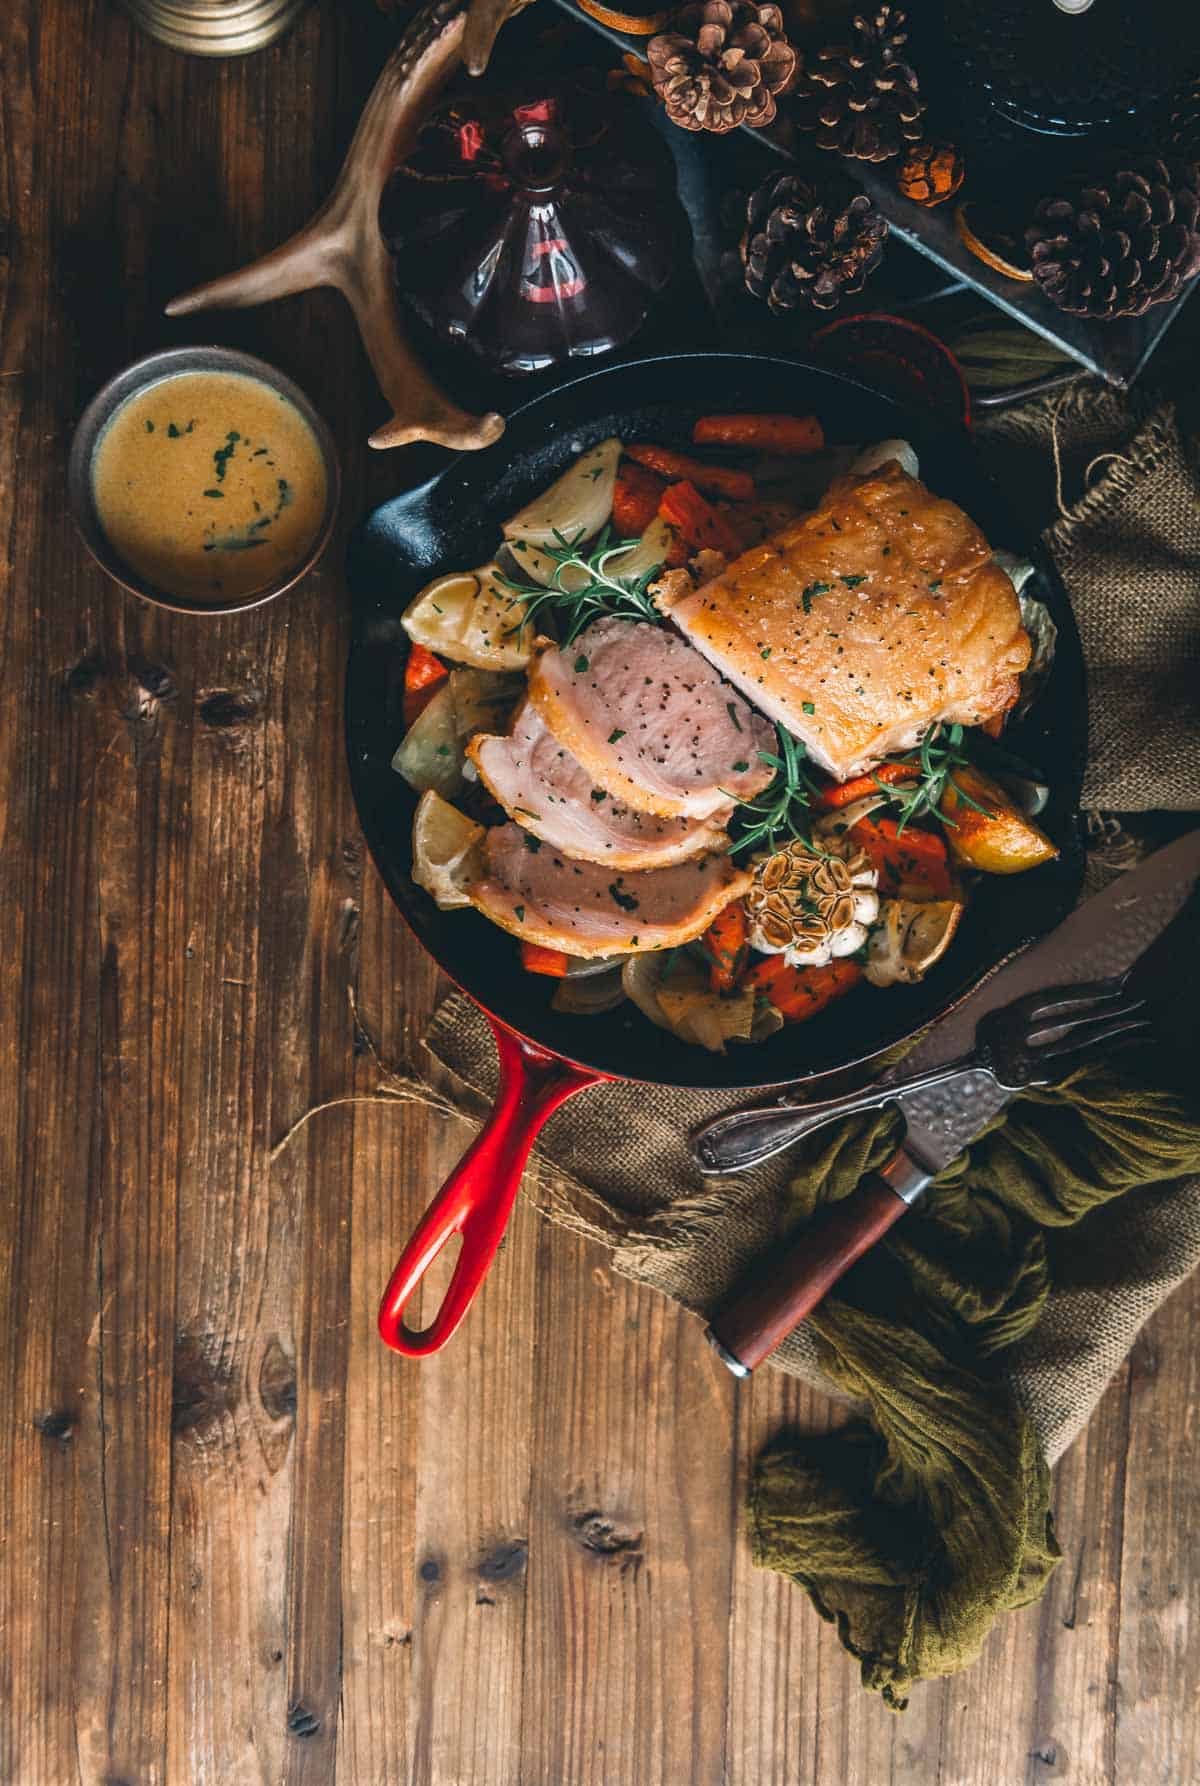 A cast iron skillet with roasted pork loin and vegetables on a wooden table.